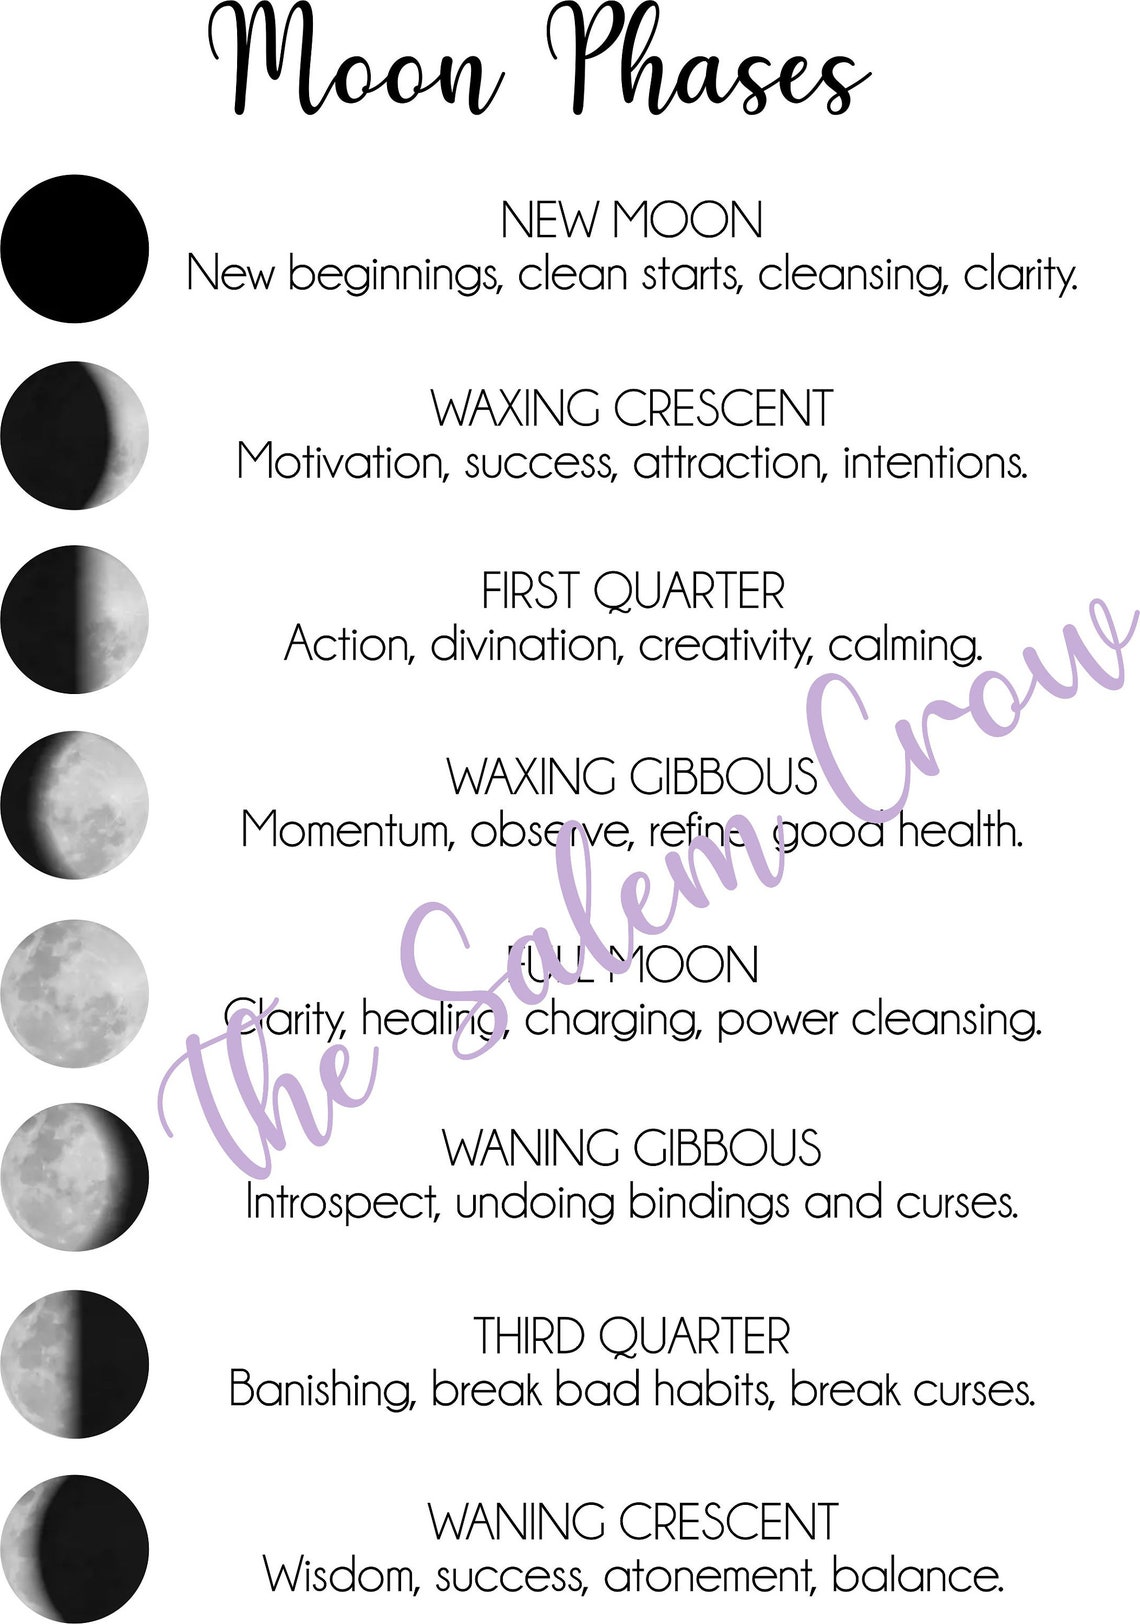 Moon Phases Book Of Shadows Page Etsy